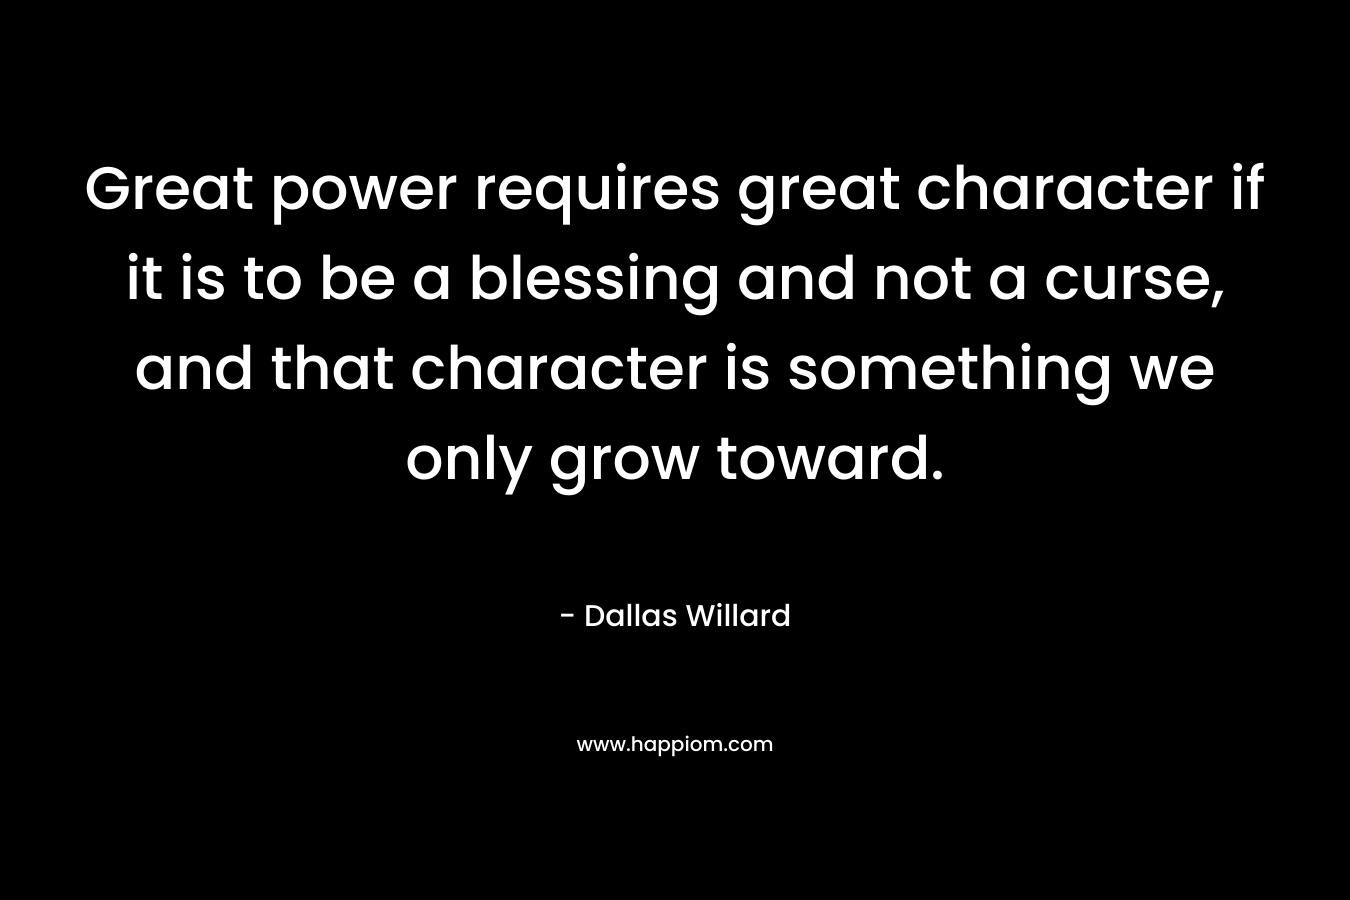 Great power requires great character if it is to be a blessing and not a curse, and that character is something we only grow toward.